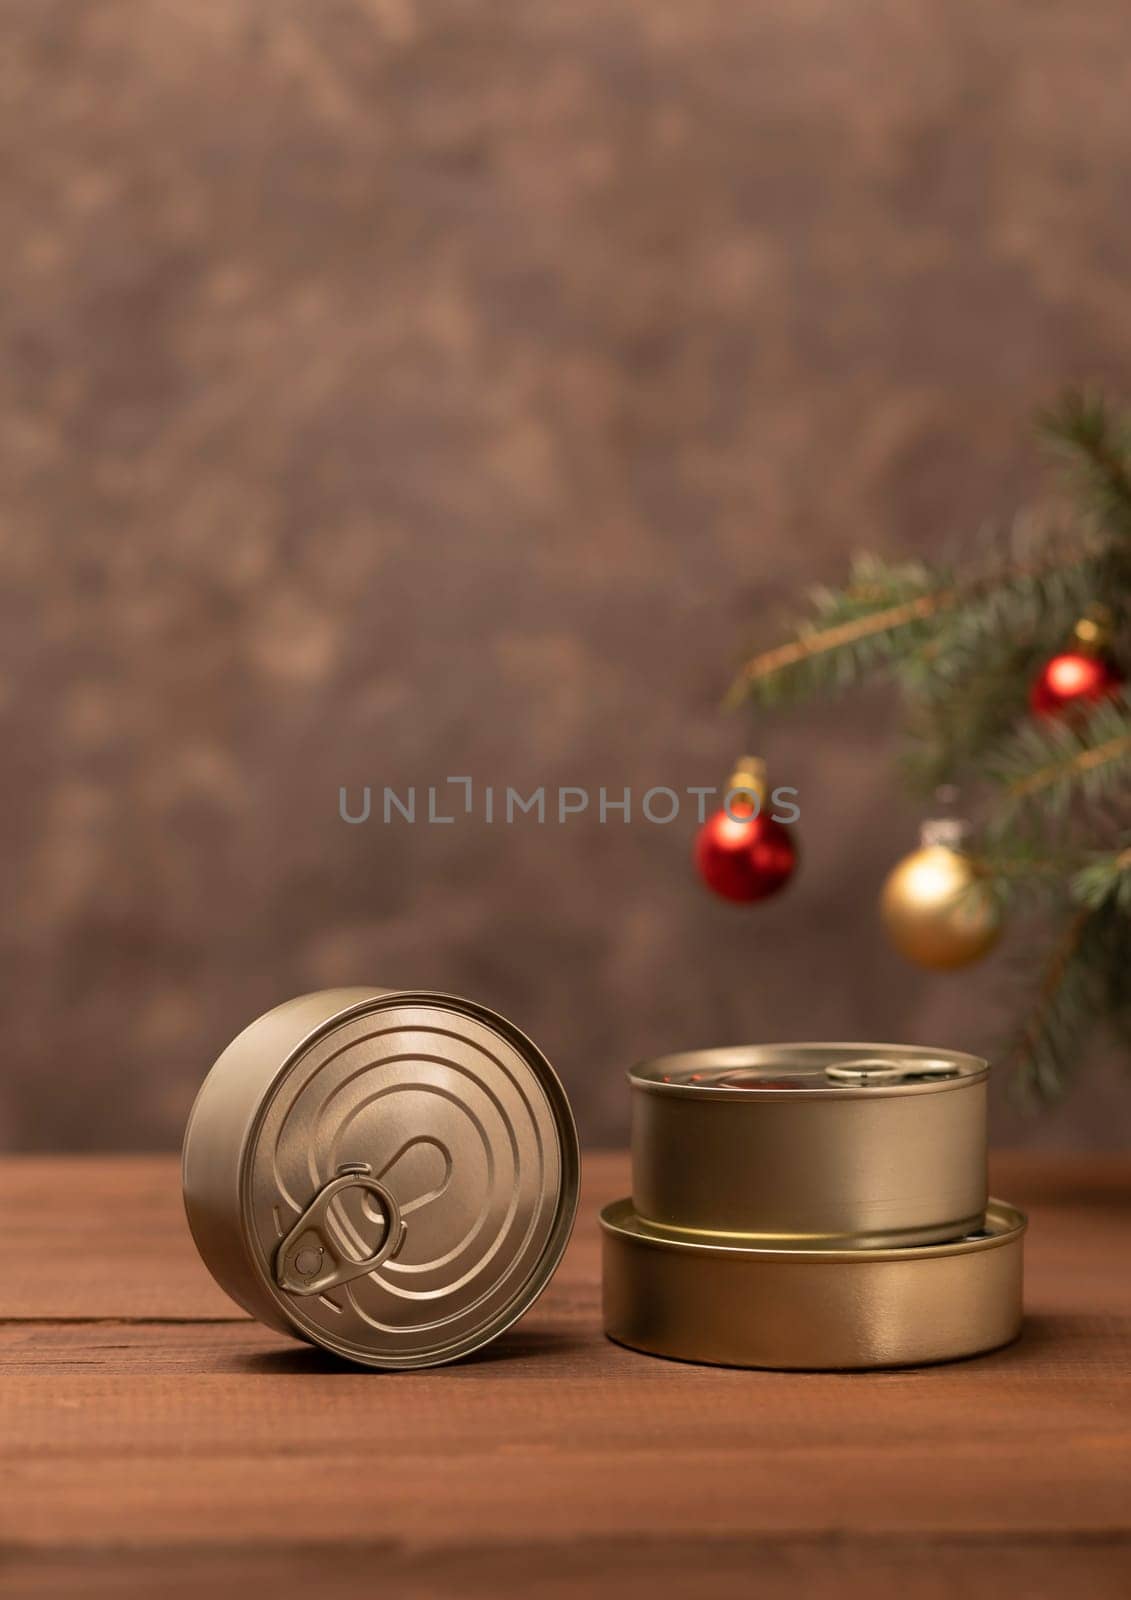 Christmas canned food, products, preservation, packed fish, meat, vegetables in can on wooden table Christmas tree and toy balls. Copy space. New Year food concept. Vertical plane, space for text